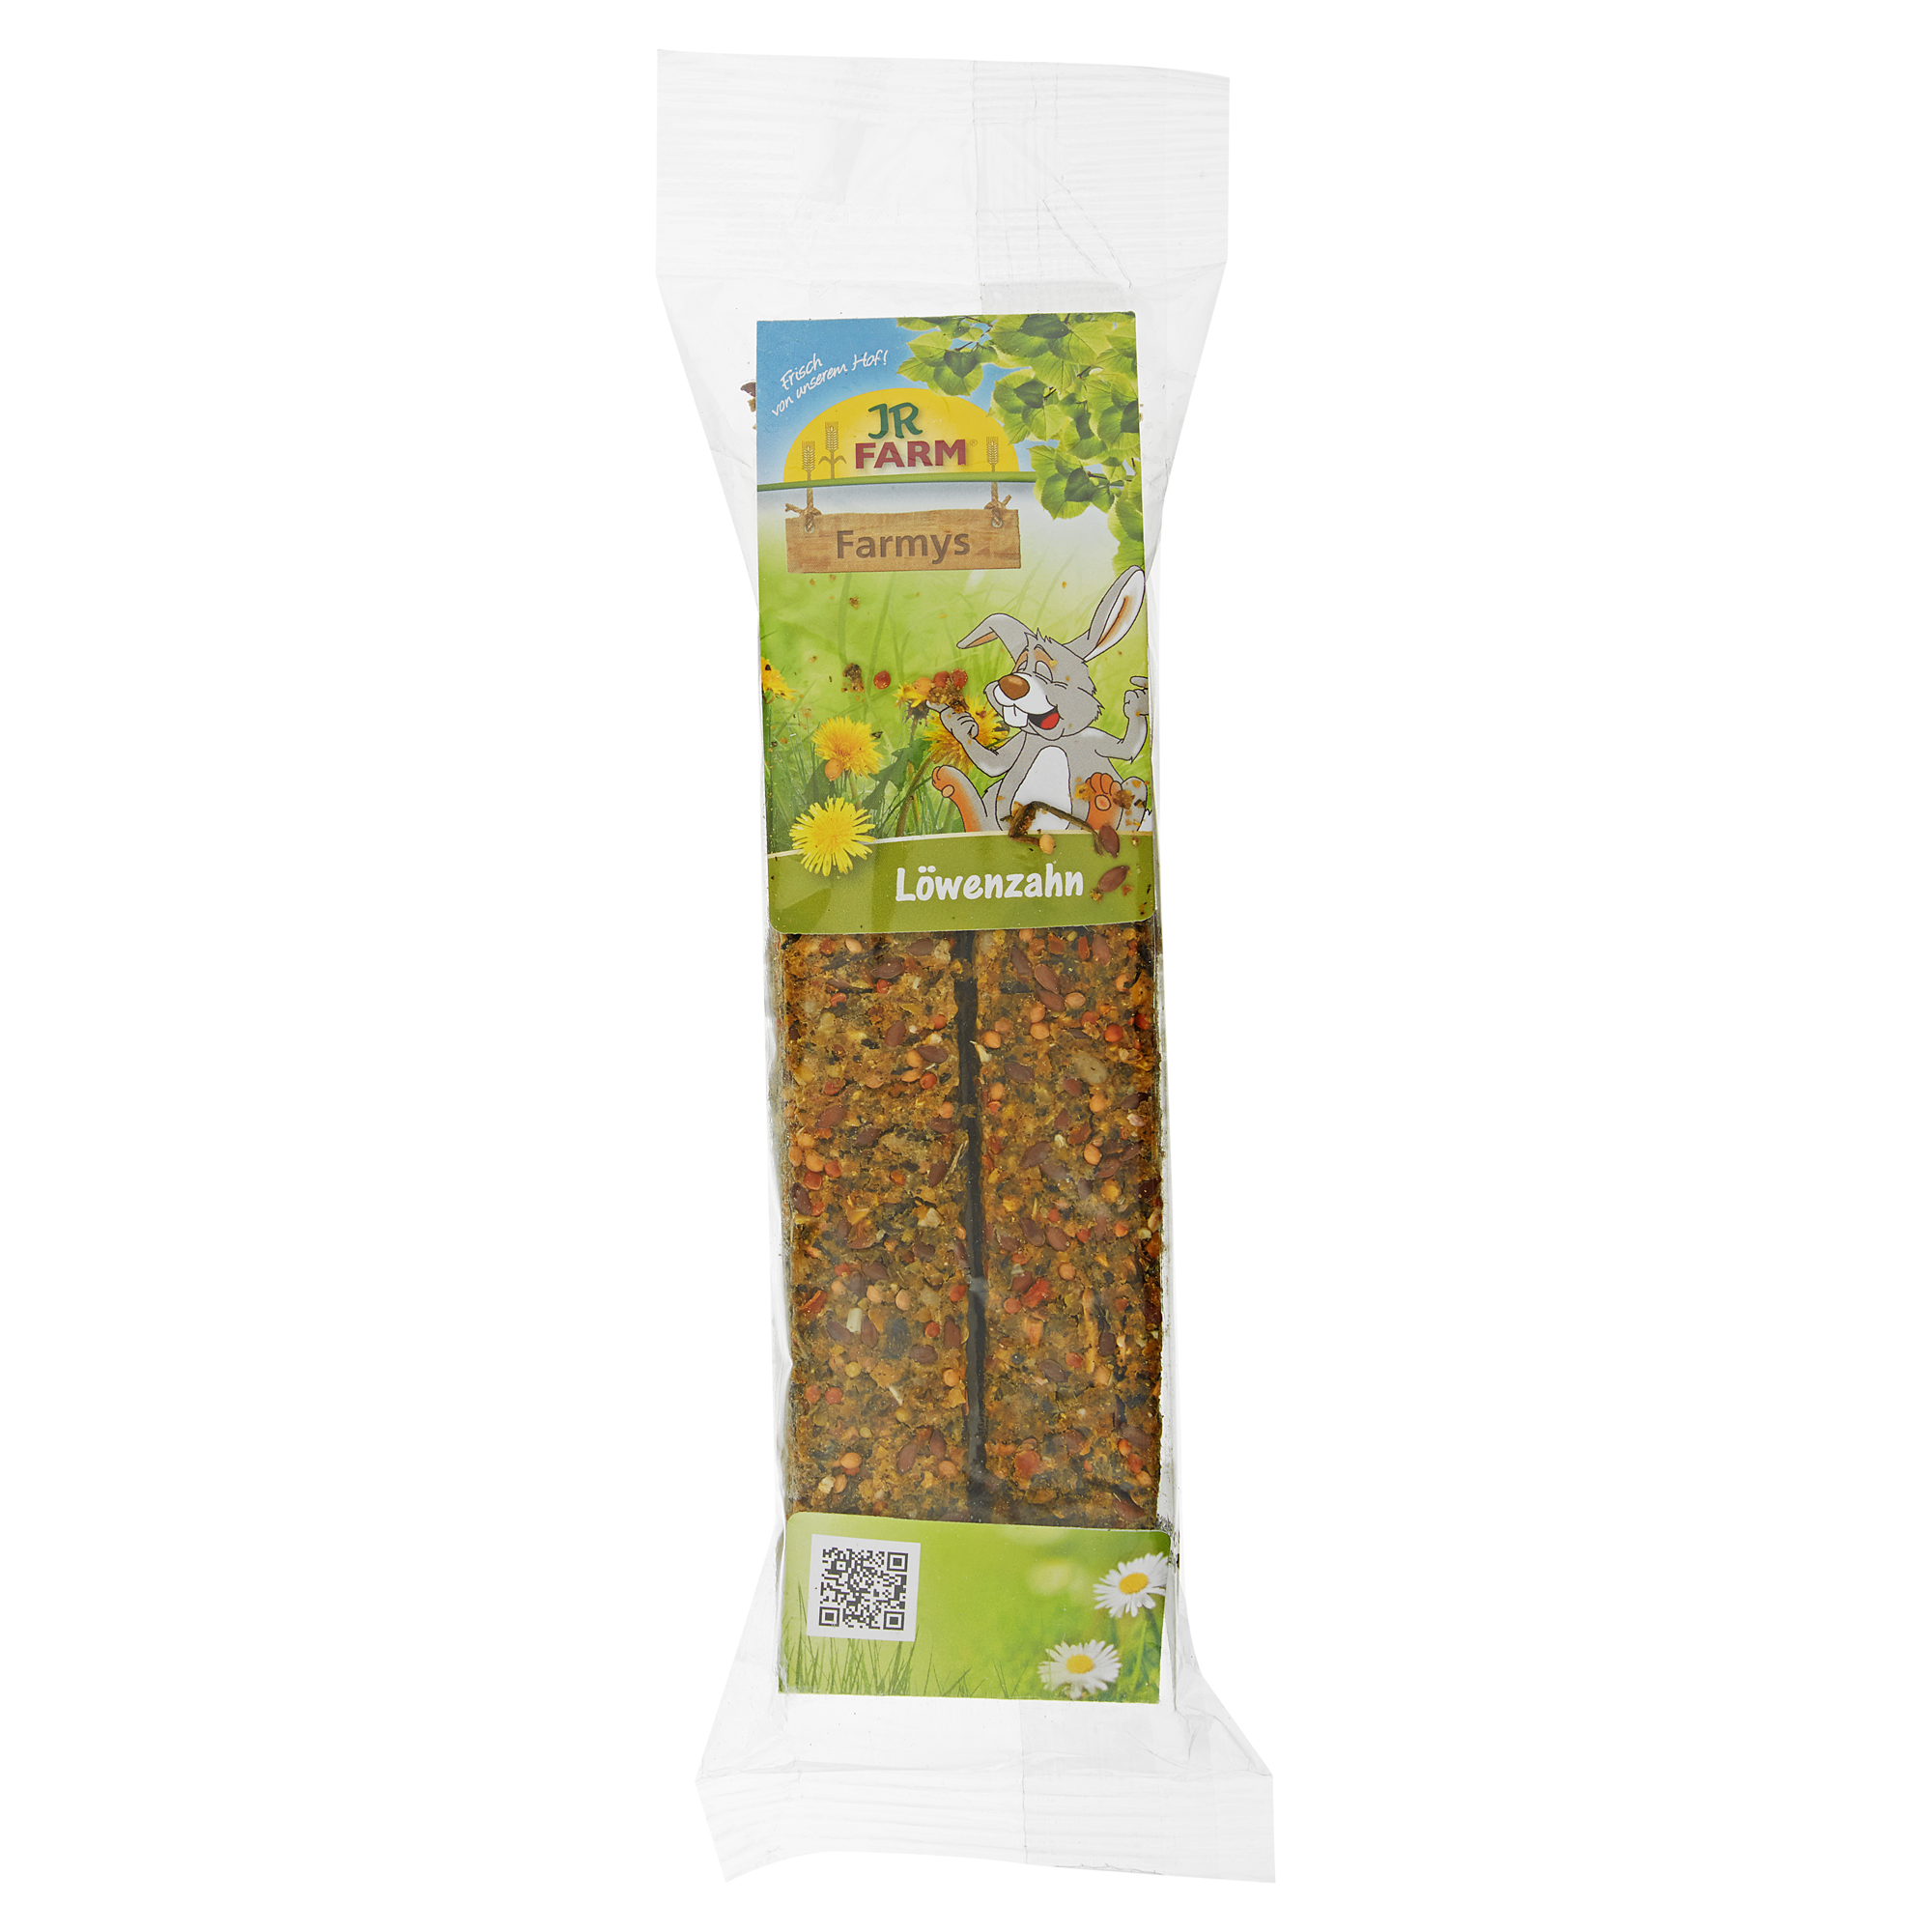 Nagersnack "Farmys" Löwenzahn 2 Stück + product picture